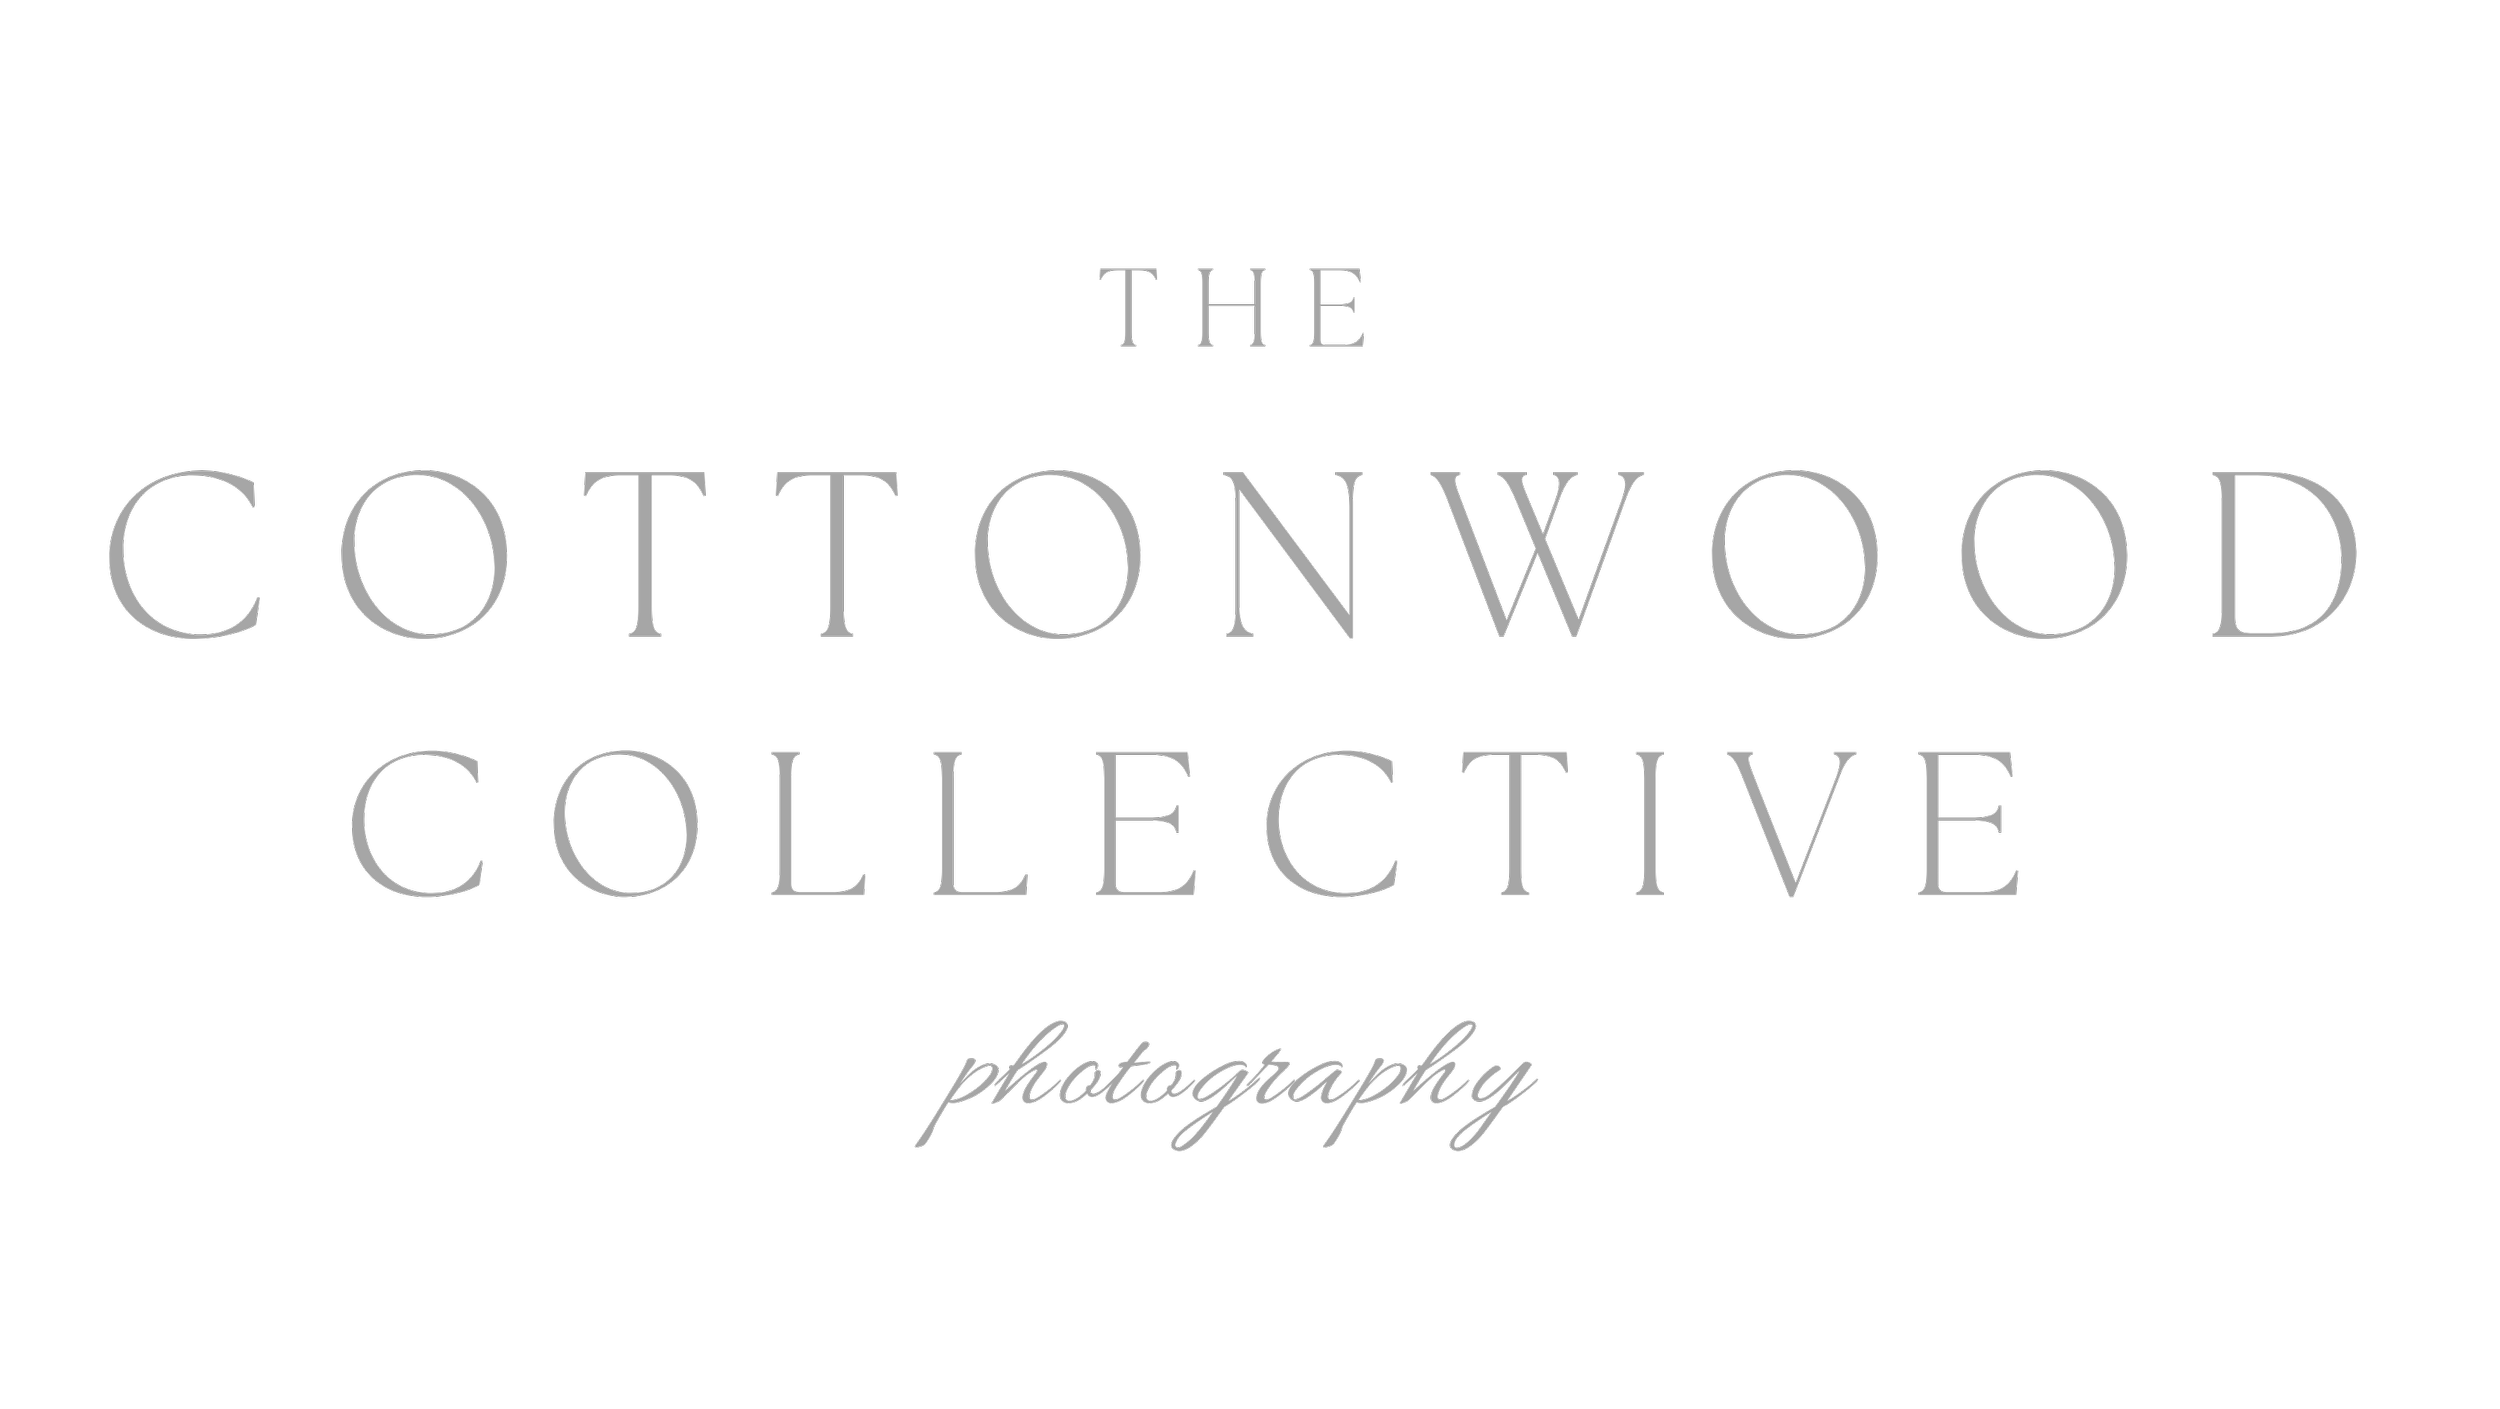 The Cottonwood Collective